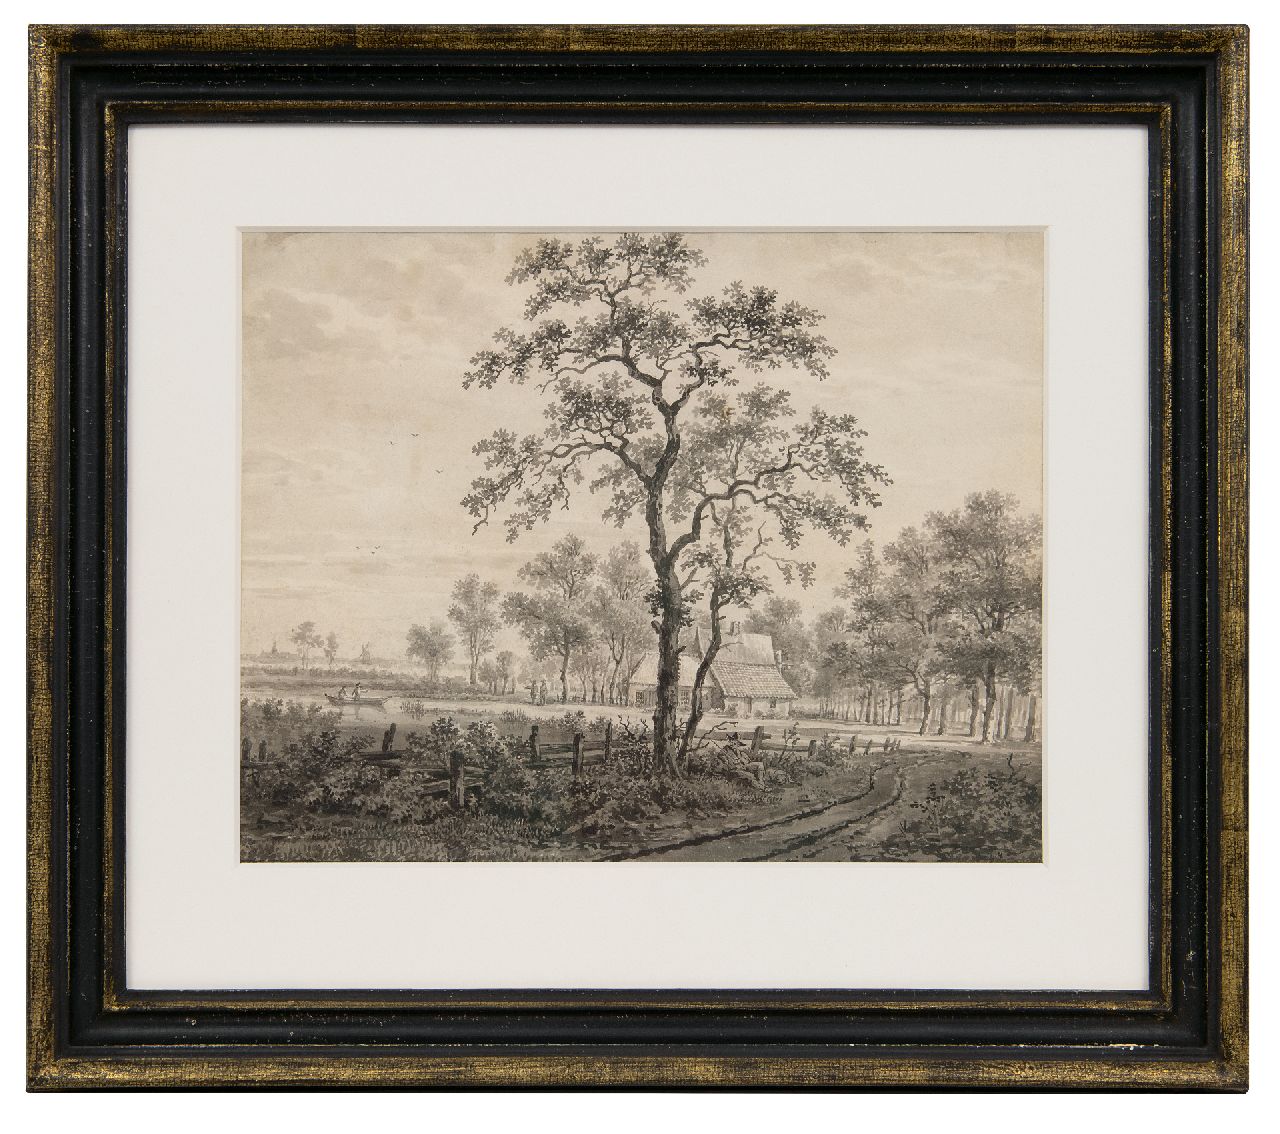 Göbell G.H.  | Gerrit Hendrik Göbell | Watercolours and drawings offered for sale | Landscape at Rijssen, pen, brush and ink on paper 22.1 x 27.8 cm, signed on the reverse and dated on the reverse 1830